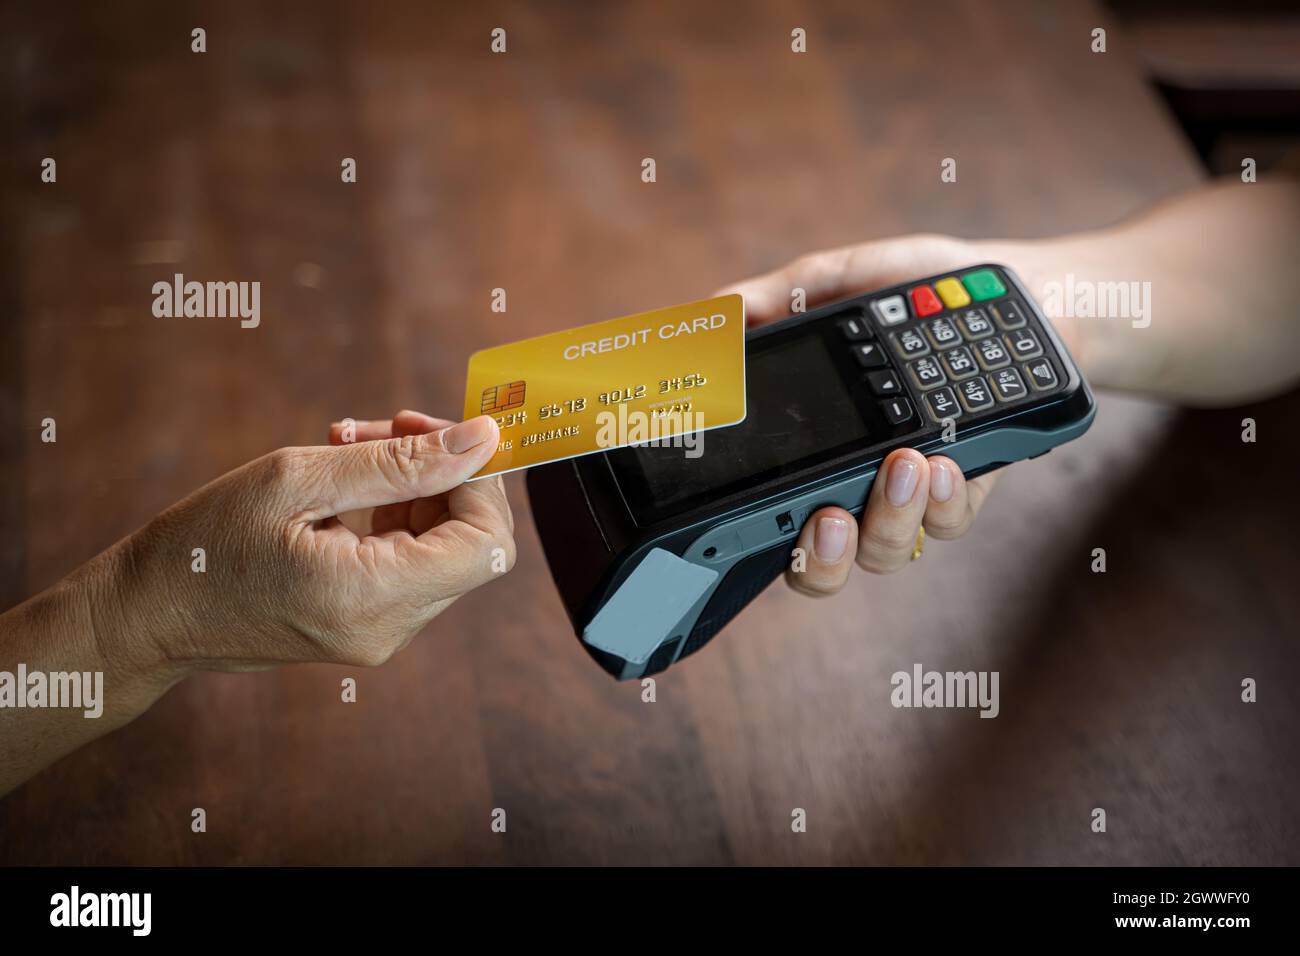 Customer Using Credit Card For Payment To Owner At Cafe,payment Transaction With Card. Stock Photo